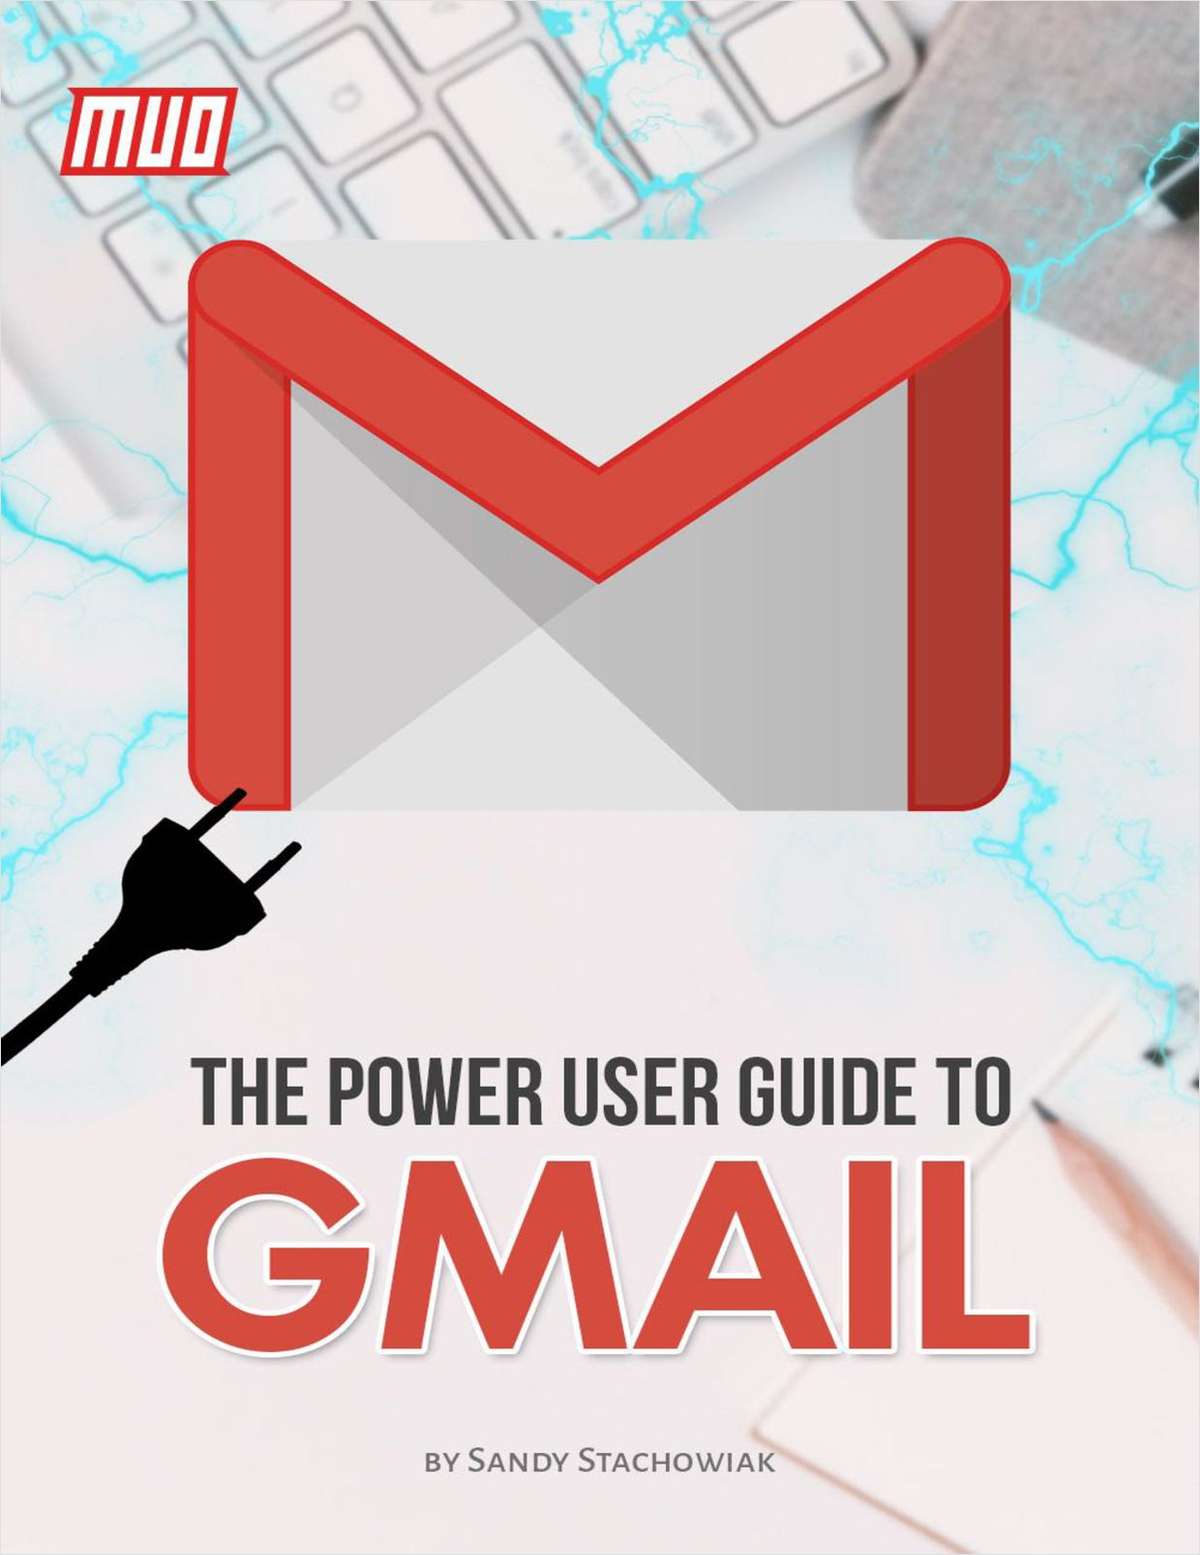 The Power User Guide to Gmail